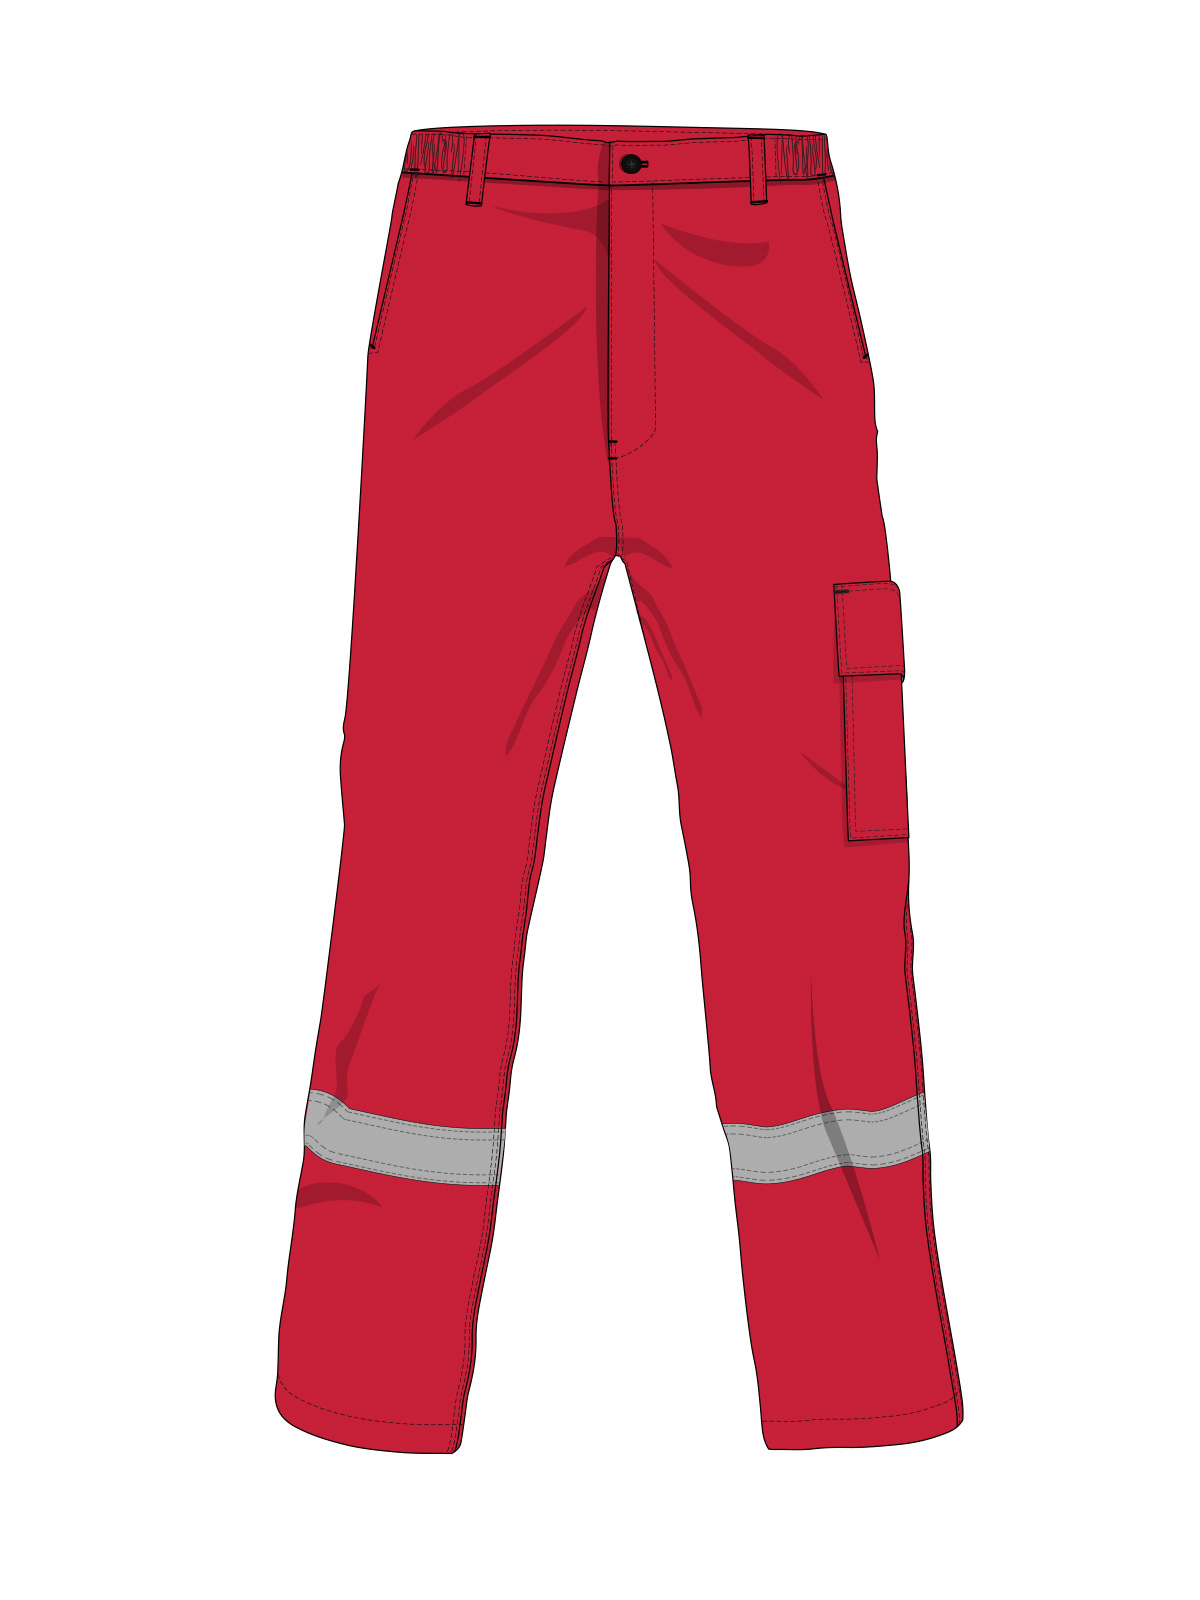 Value Fire Resistant Trousers